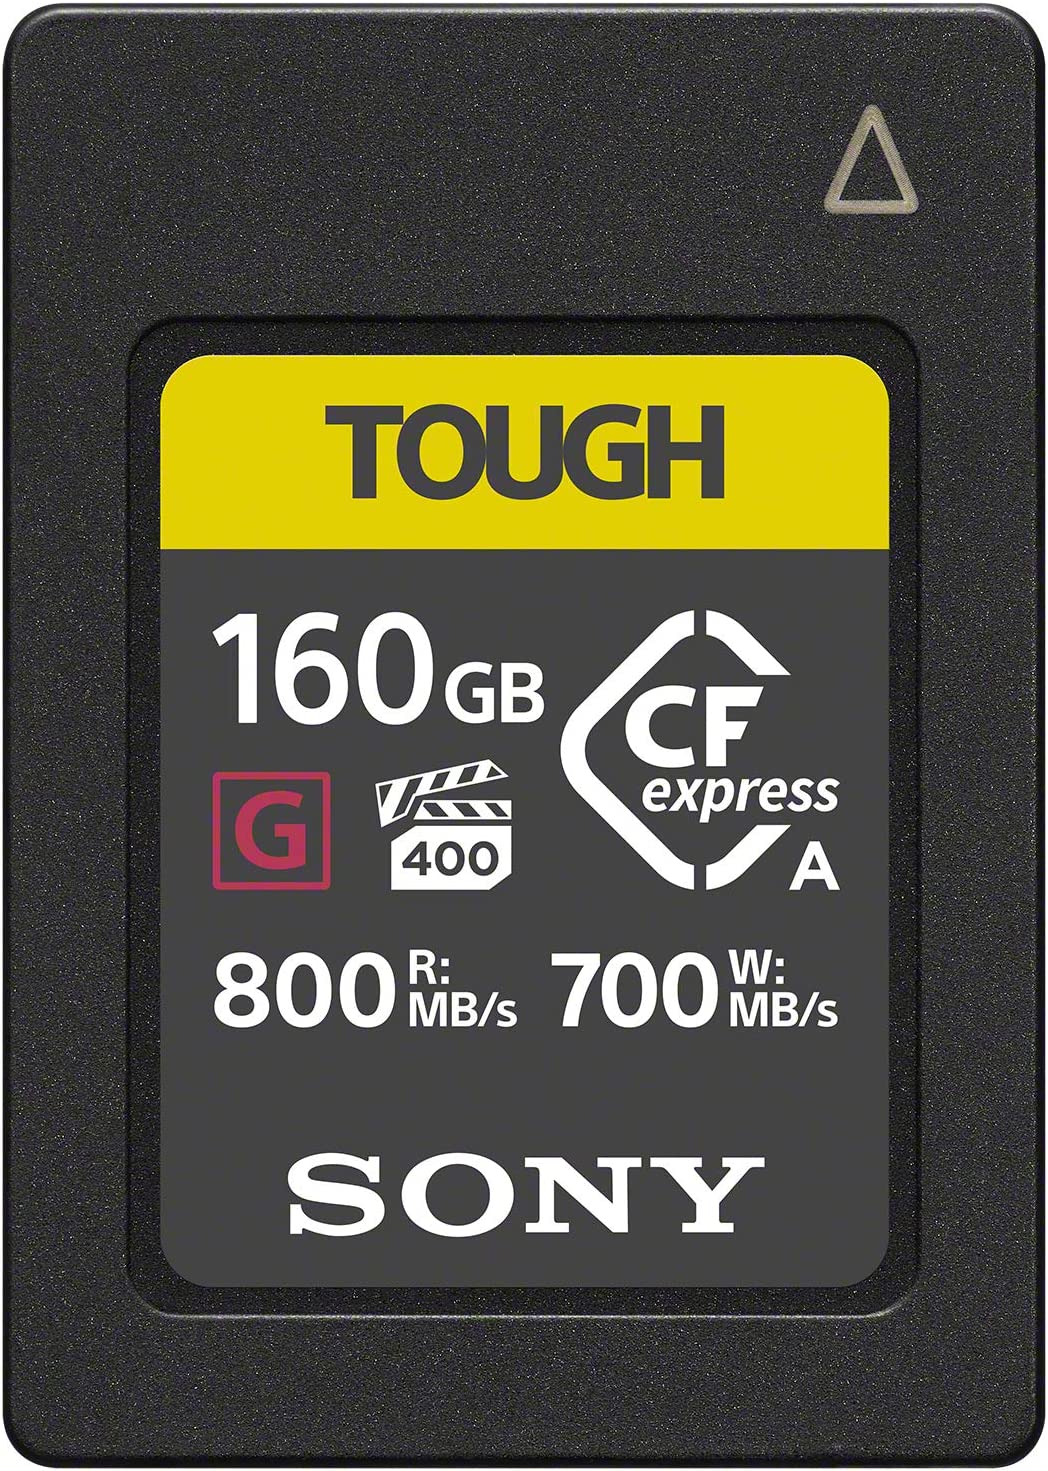 Sony CEA-G160T Tough 160GB CFexpress Type A Memory Card - CEAG160T